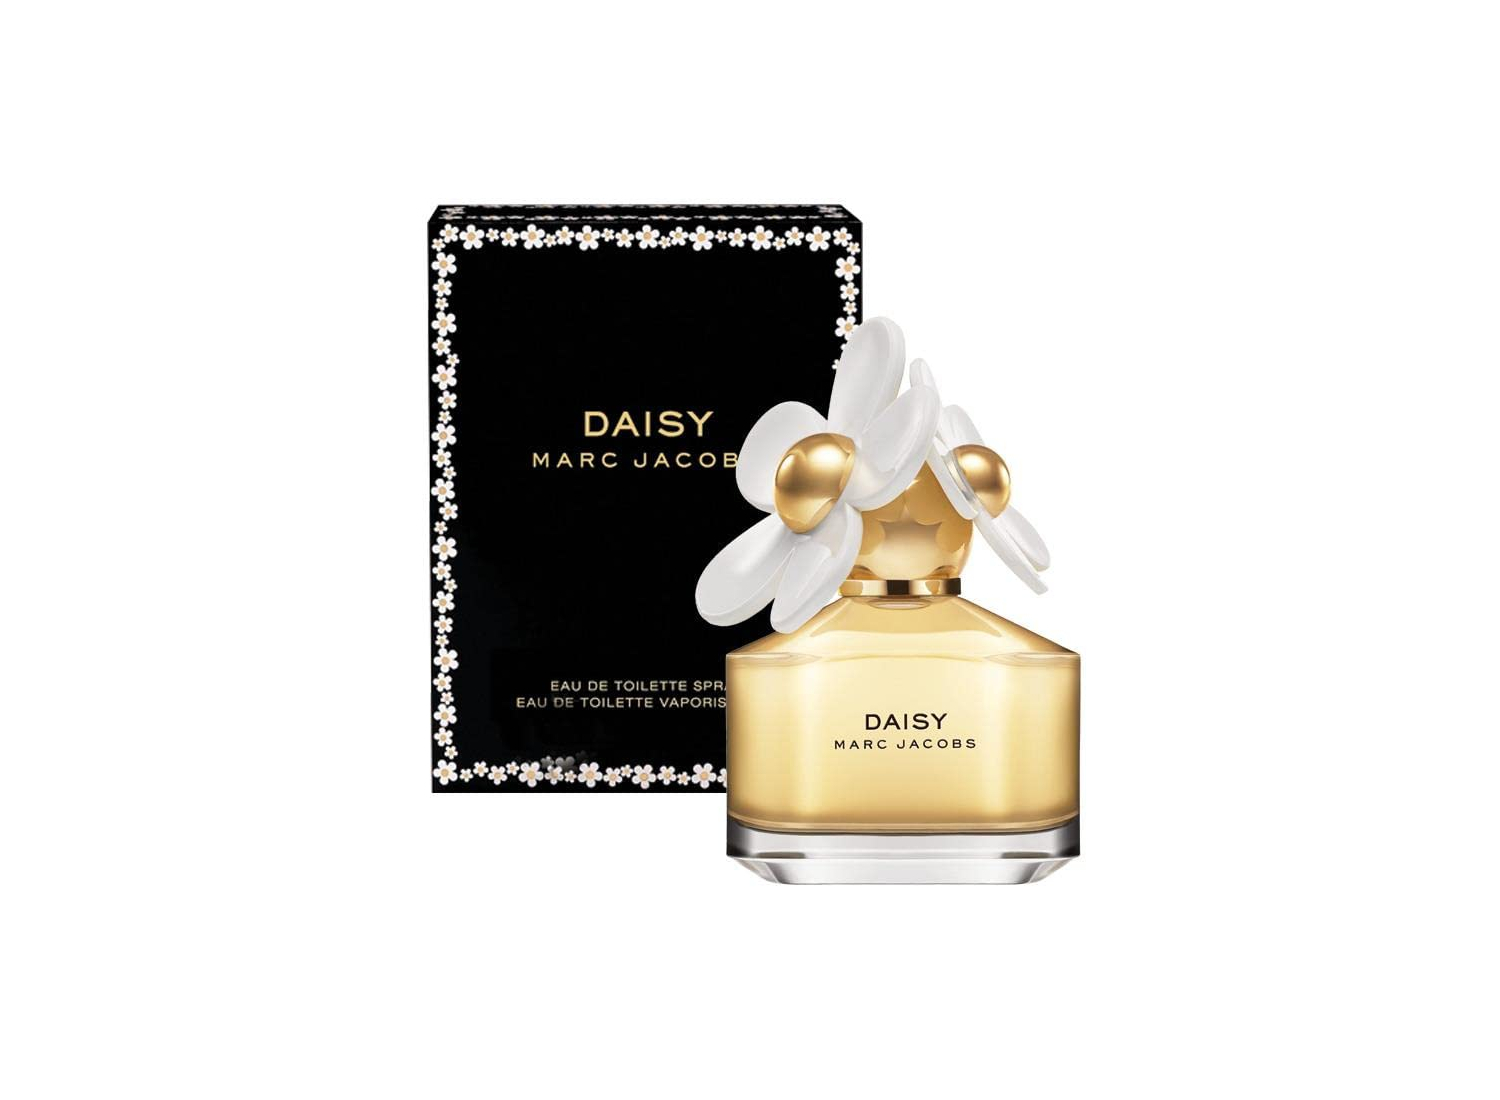 A bottle of Daisy by Marc Jacobs.